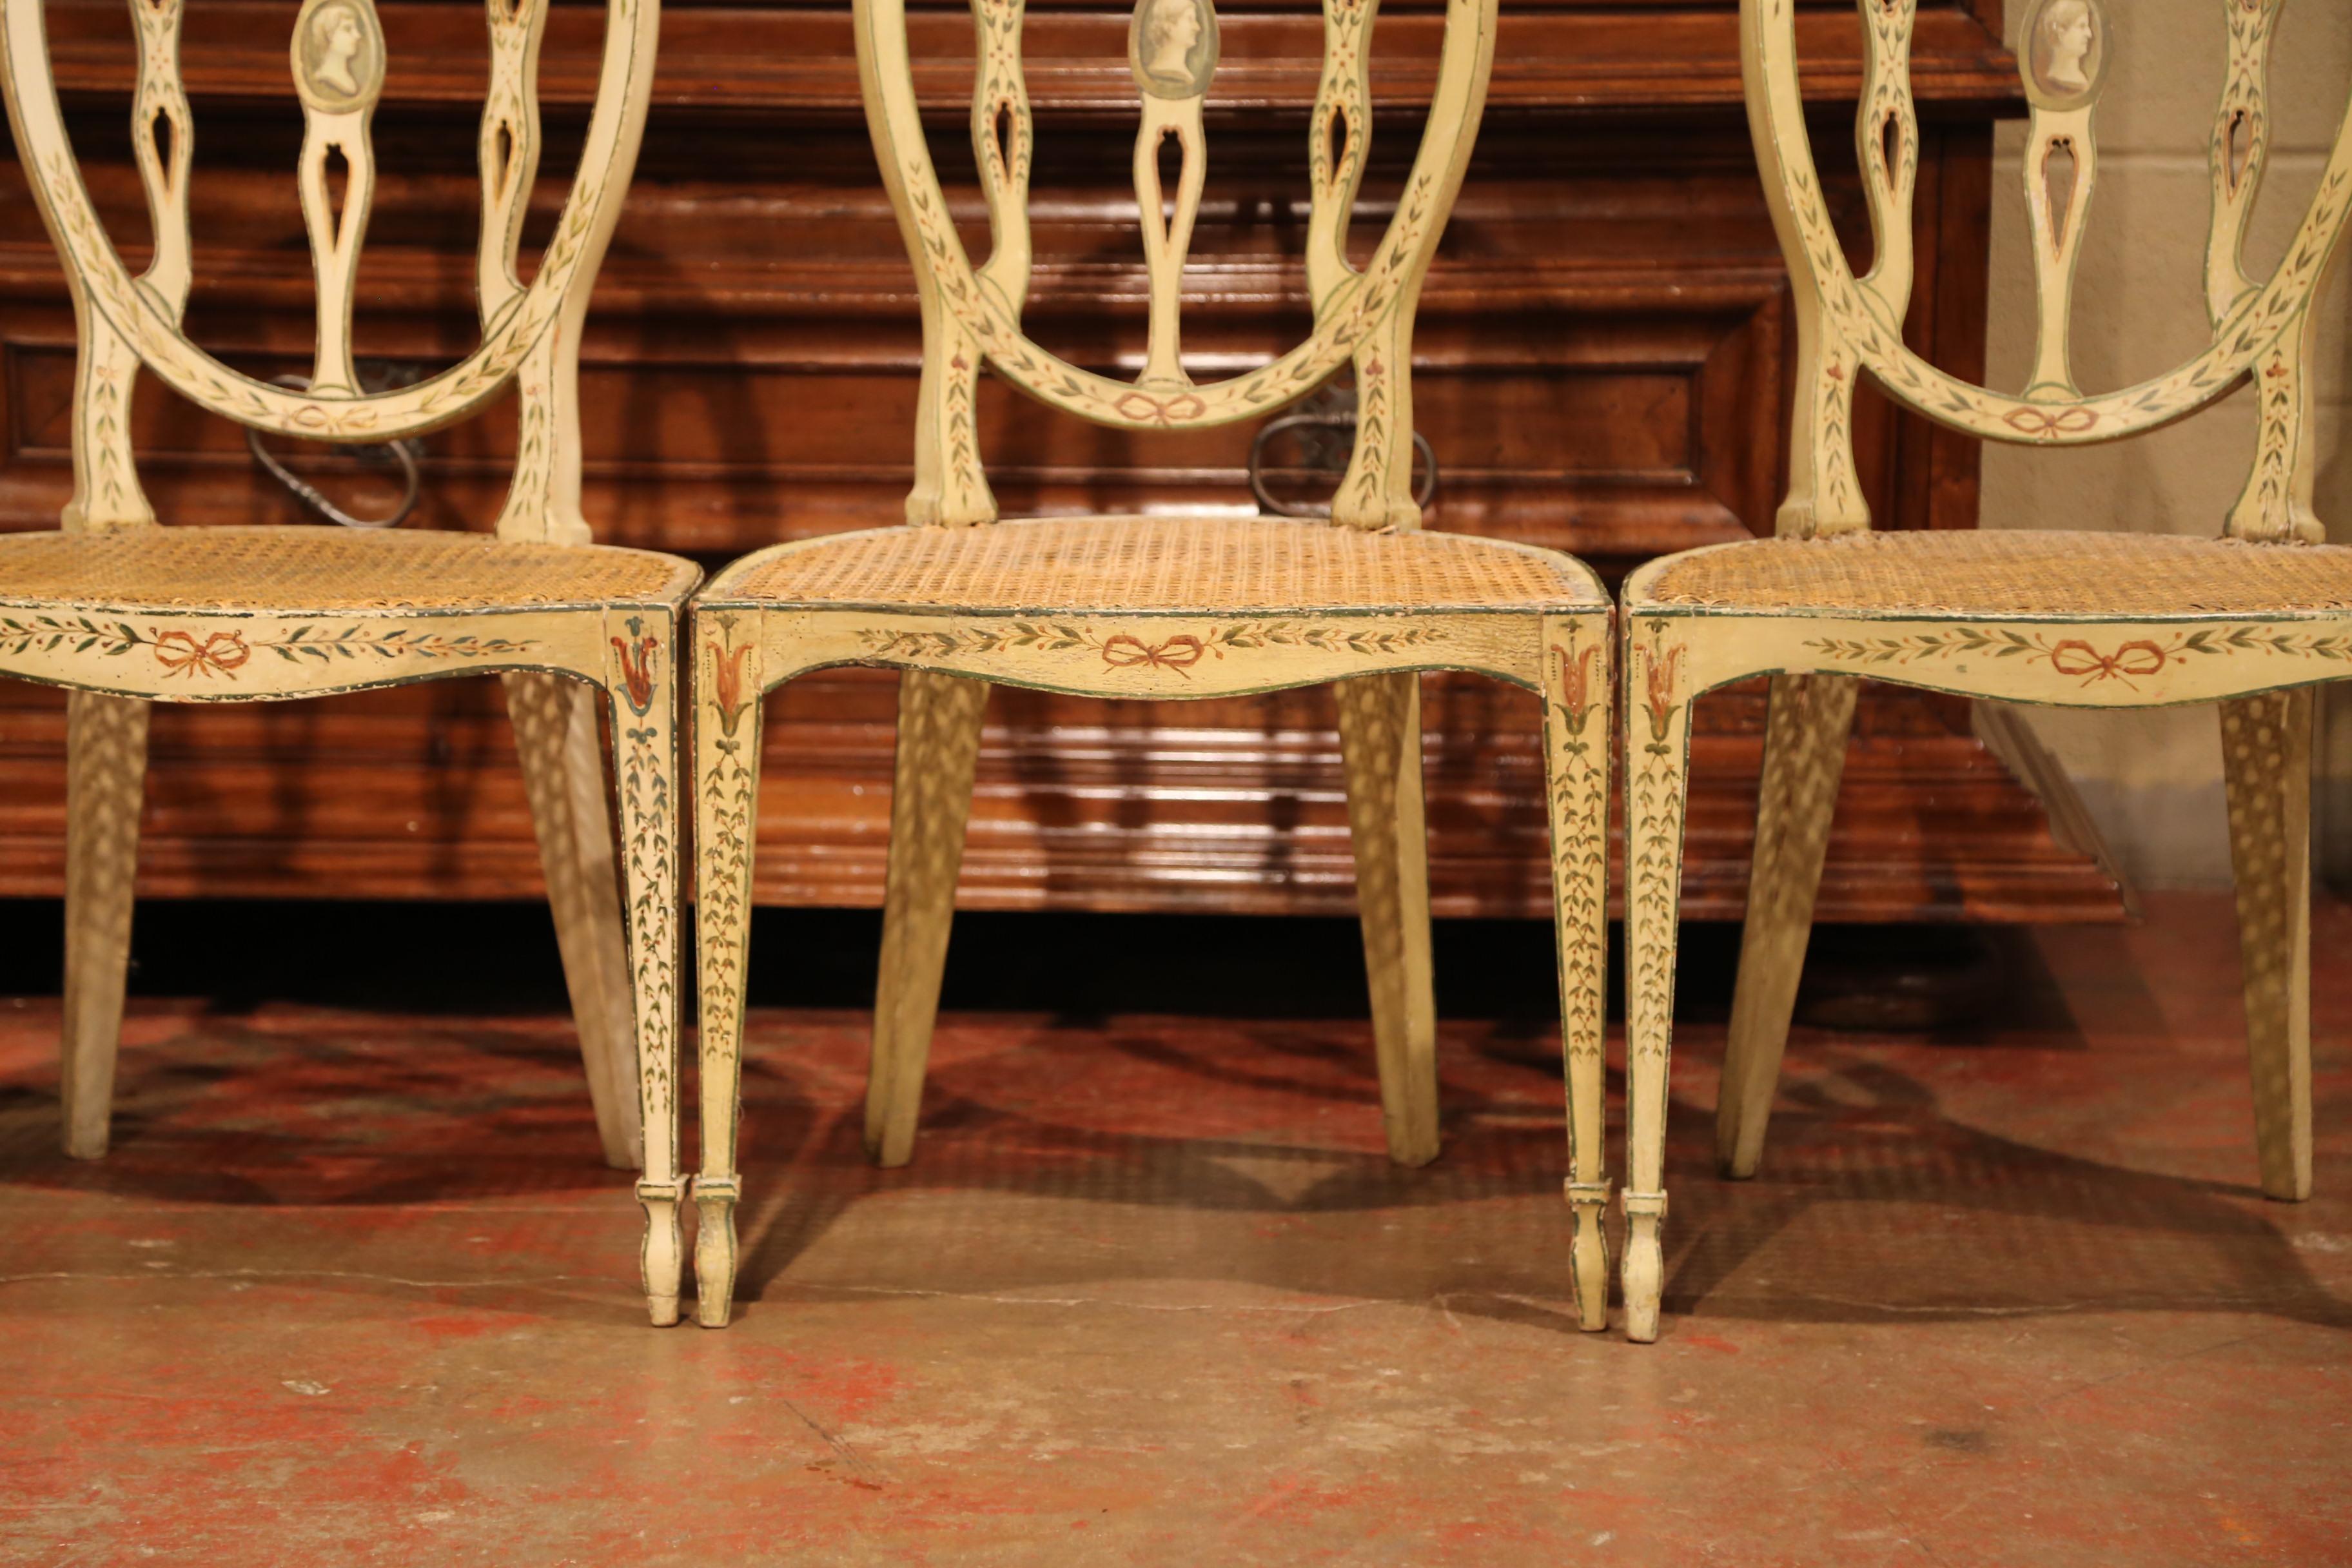 Hand-Carved Set of Four Mid-19th Century Hepplewhite Style Painted Chairs with Cane Seat